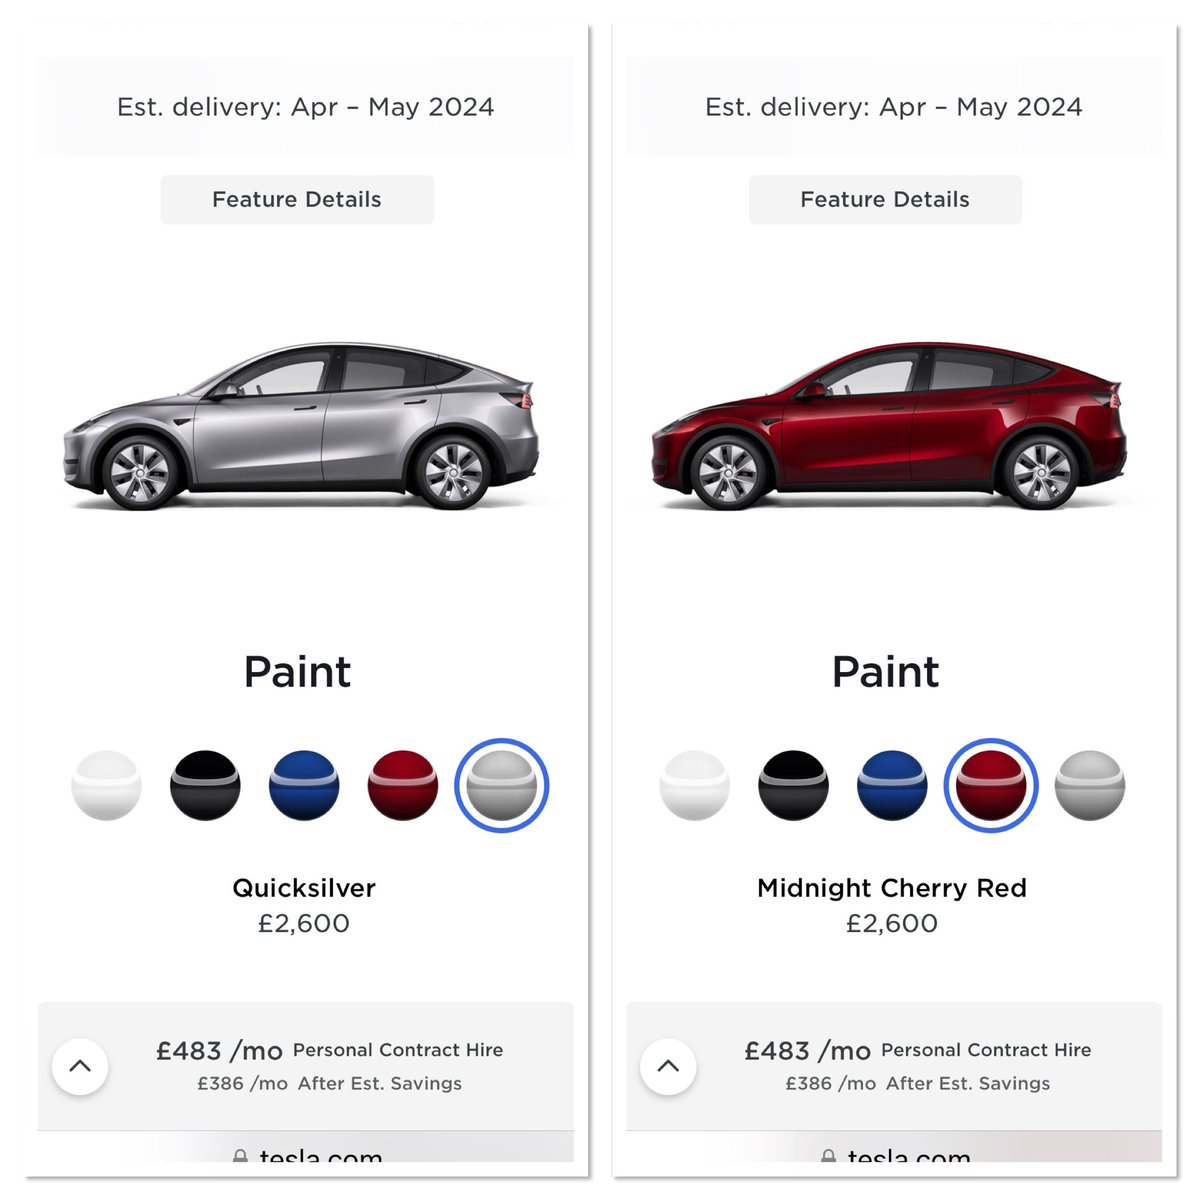 New colours available on Model Y in UK. Still Shanghai apparently, not from Berlin factory. Not for Model 3. What do you think?